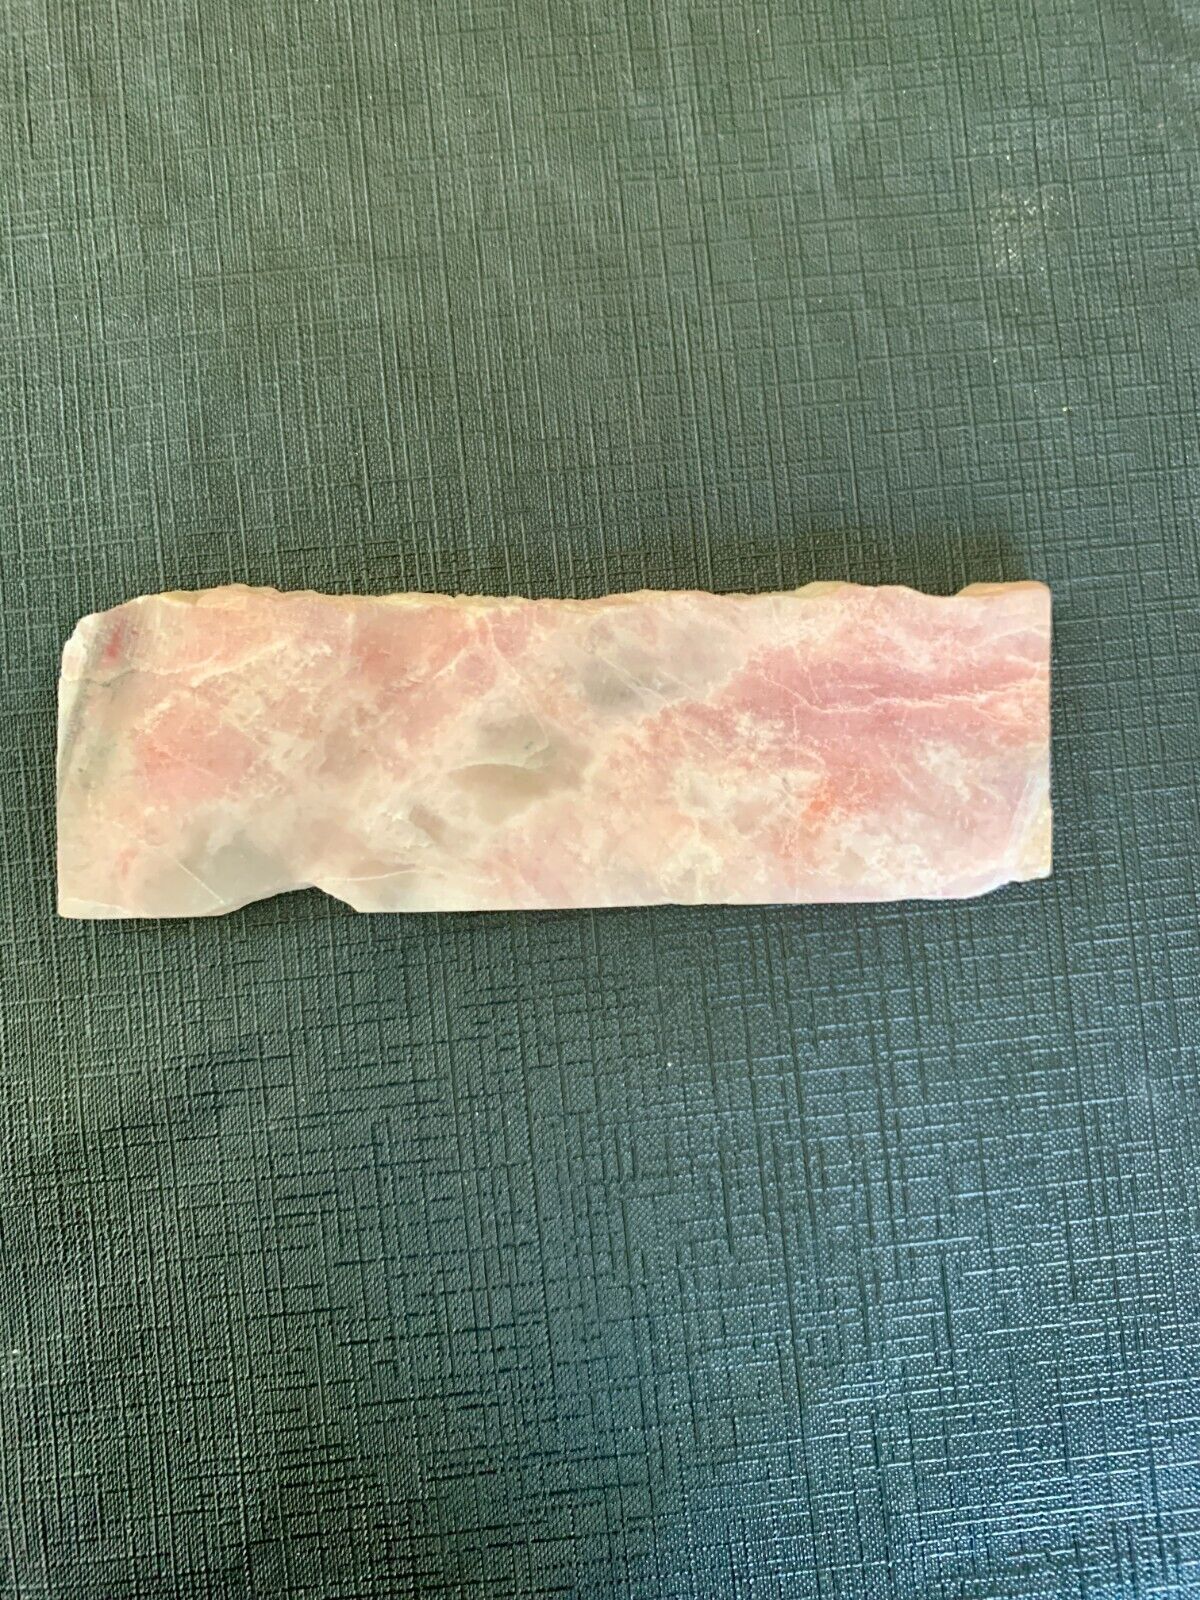 Pink Petalite rough slab for cabbing lapidary or collecting 105grams